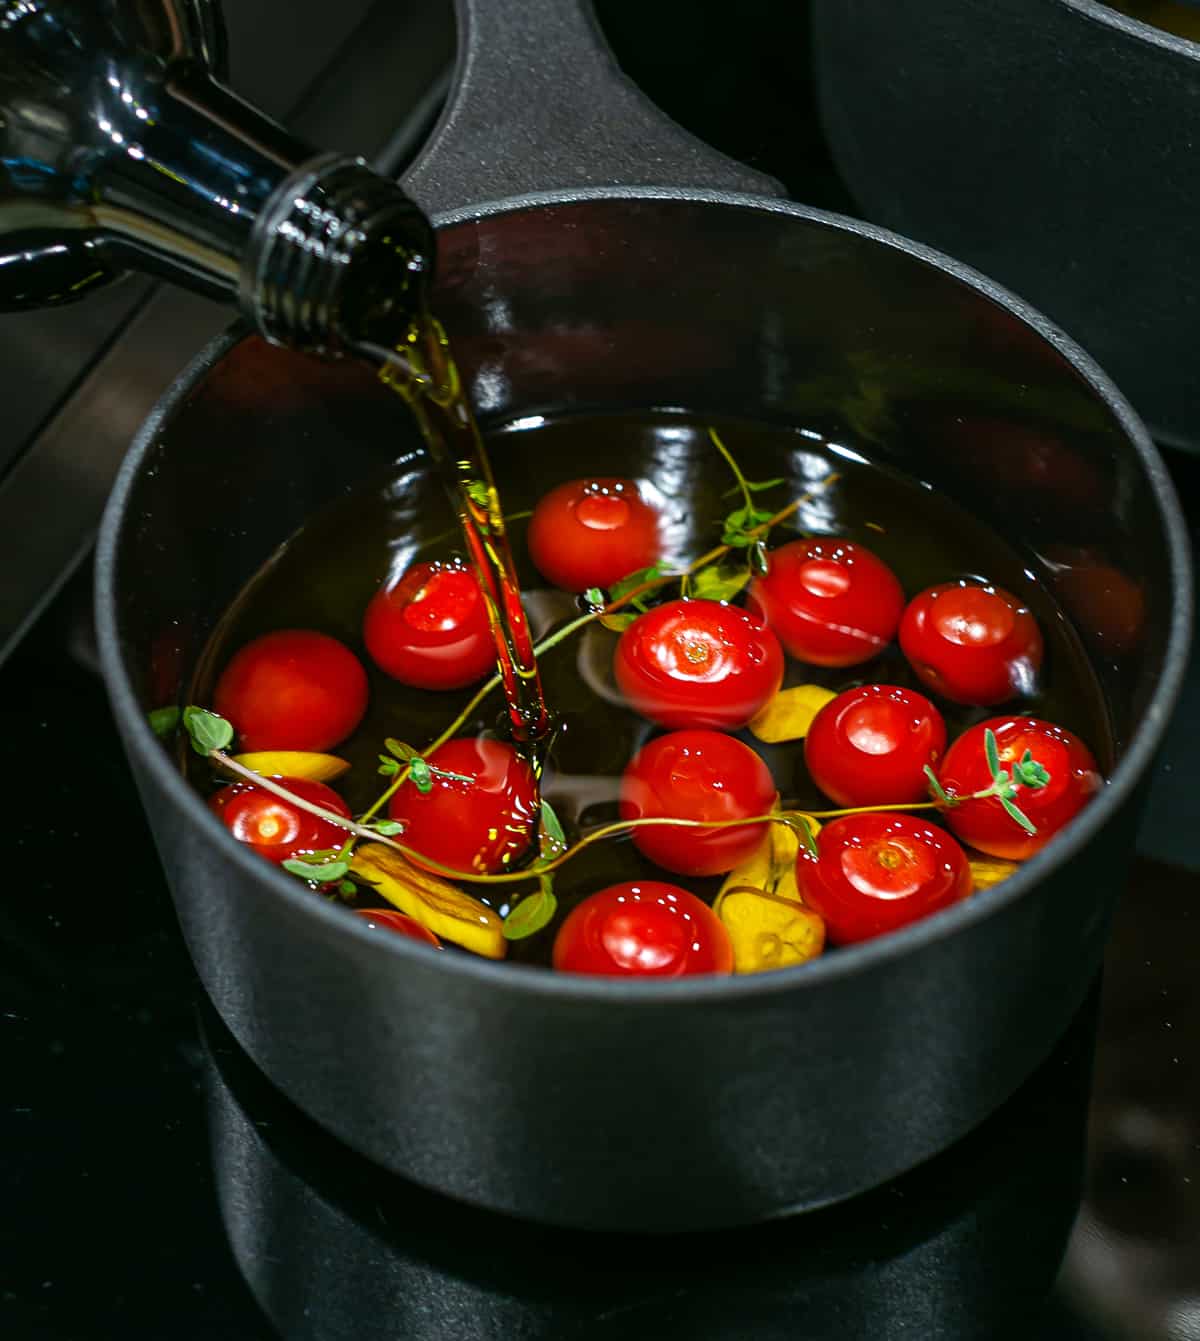 Olive oil being poured into a black stove top saucepan filled cherry tomatoes, garlic cloves and twigs of thyme